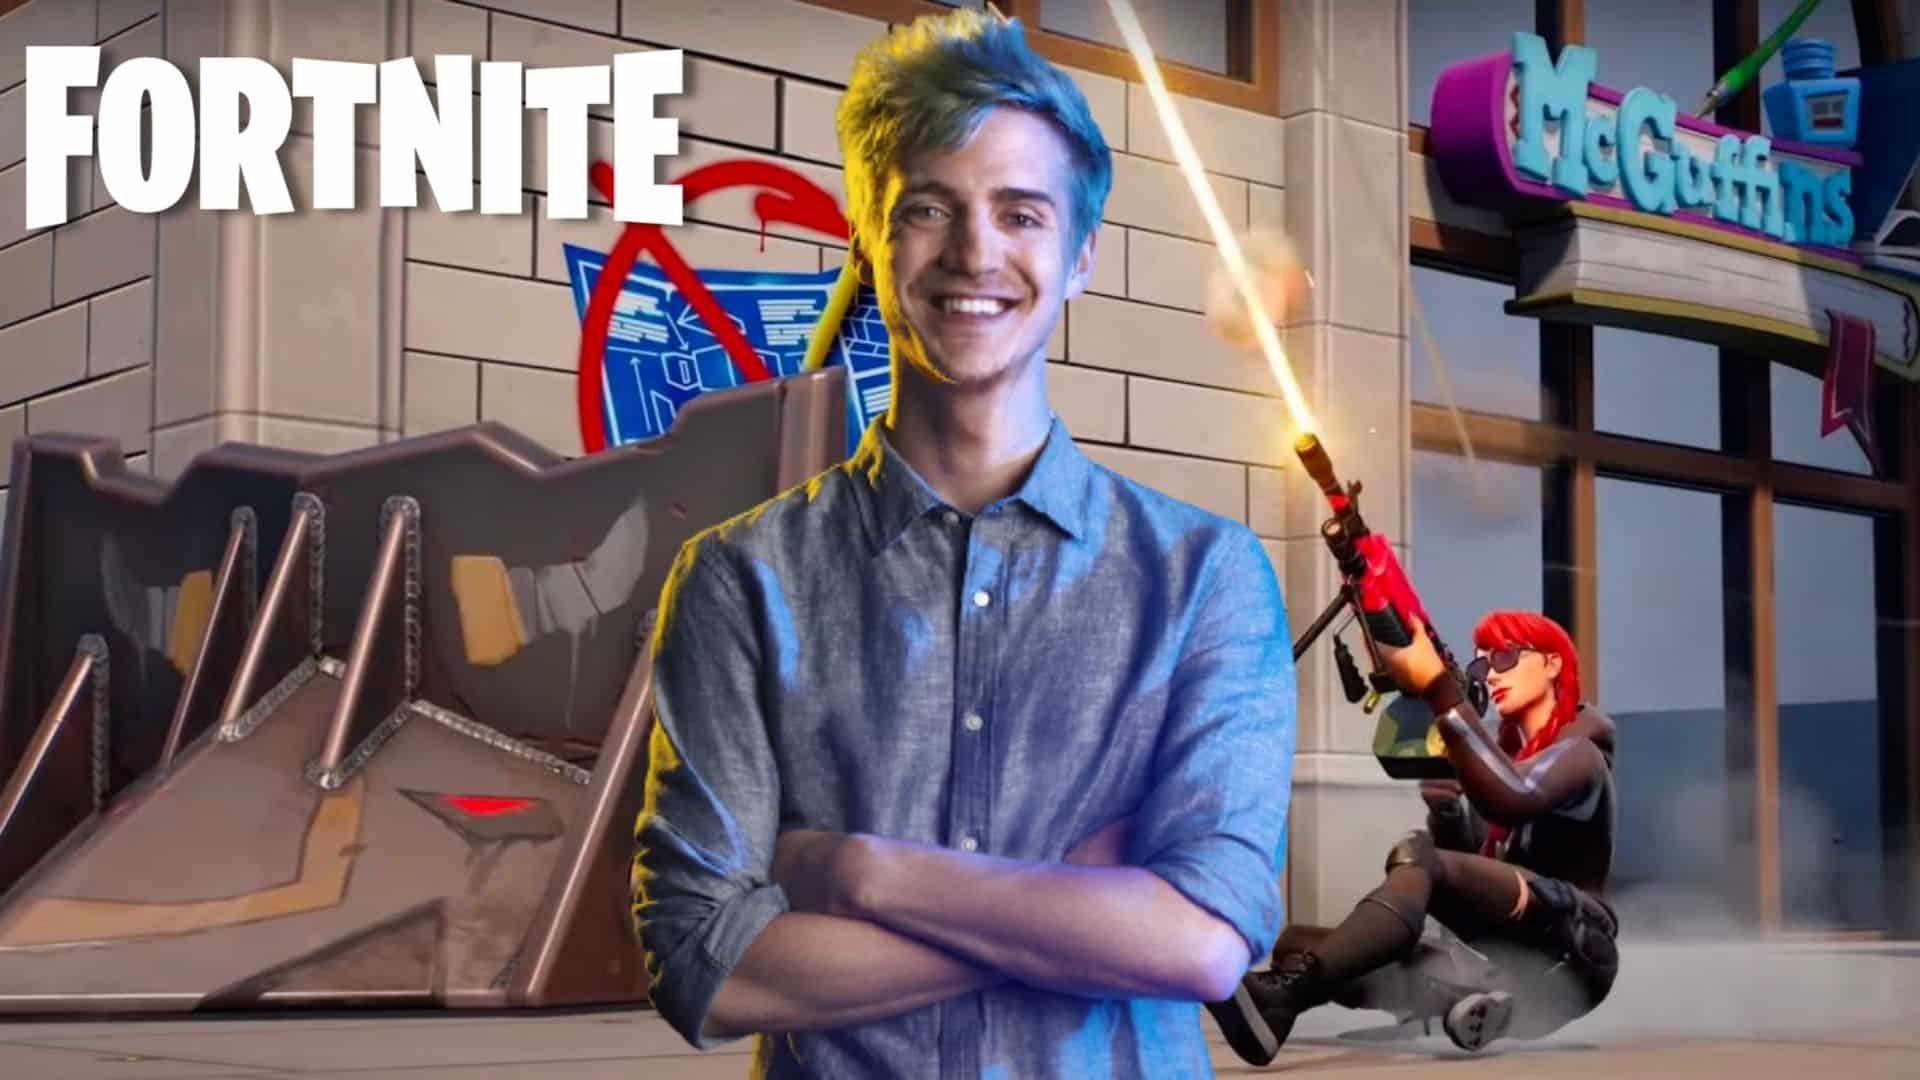 Ninja with Fortnite No Build characters in the background